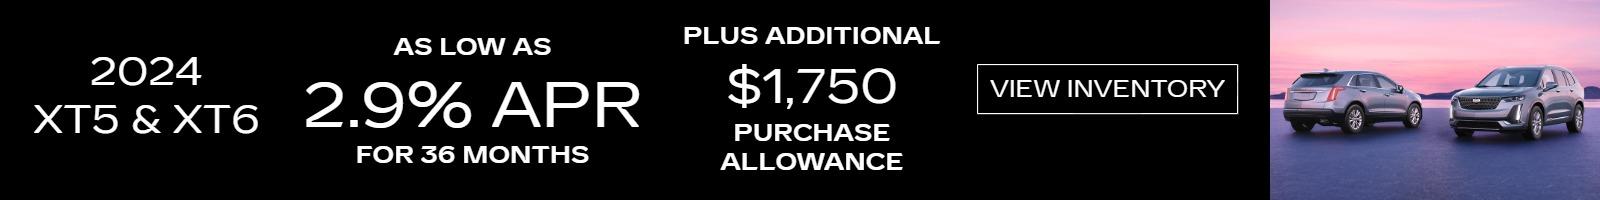 AS LOW AS 2.9% FOR 36 MONTHS ON XT5 AND XT6 PLUS ADDITIONAL $1750 PURCHASE ALLOWANCE